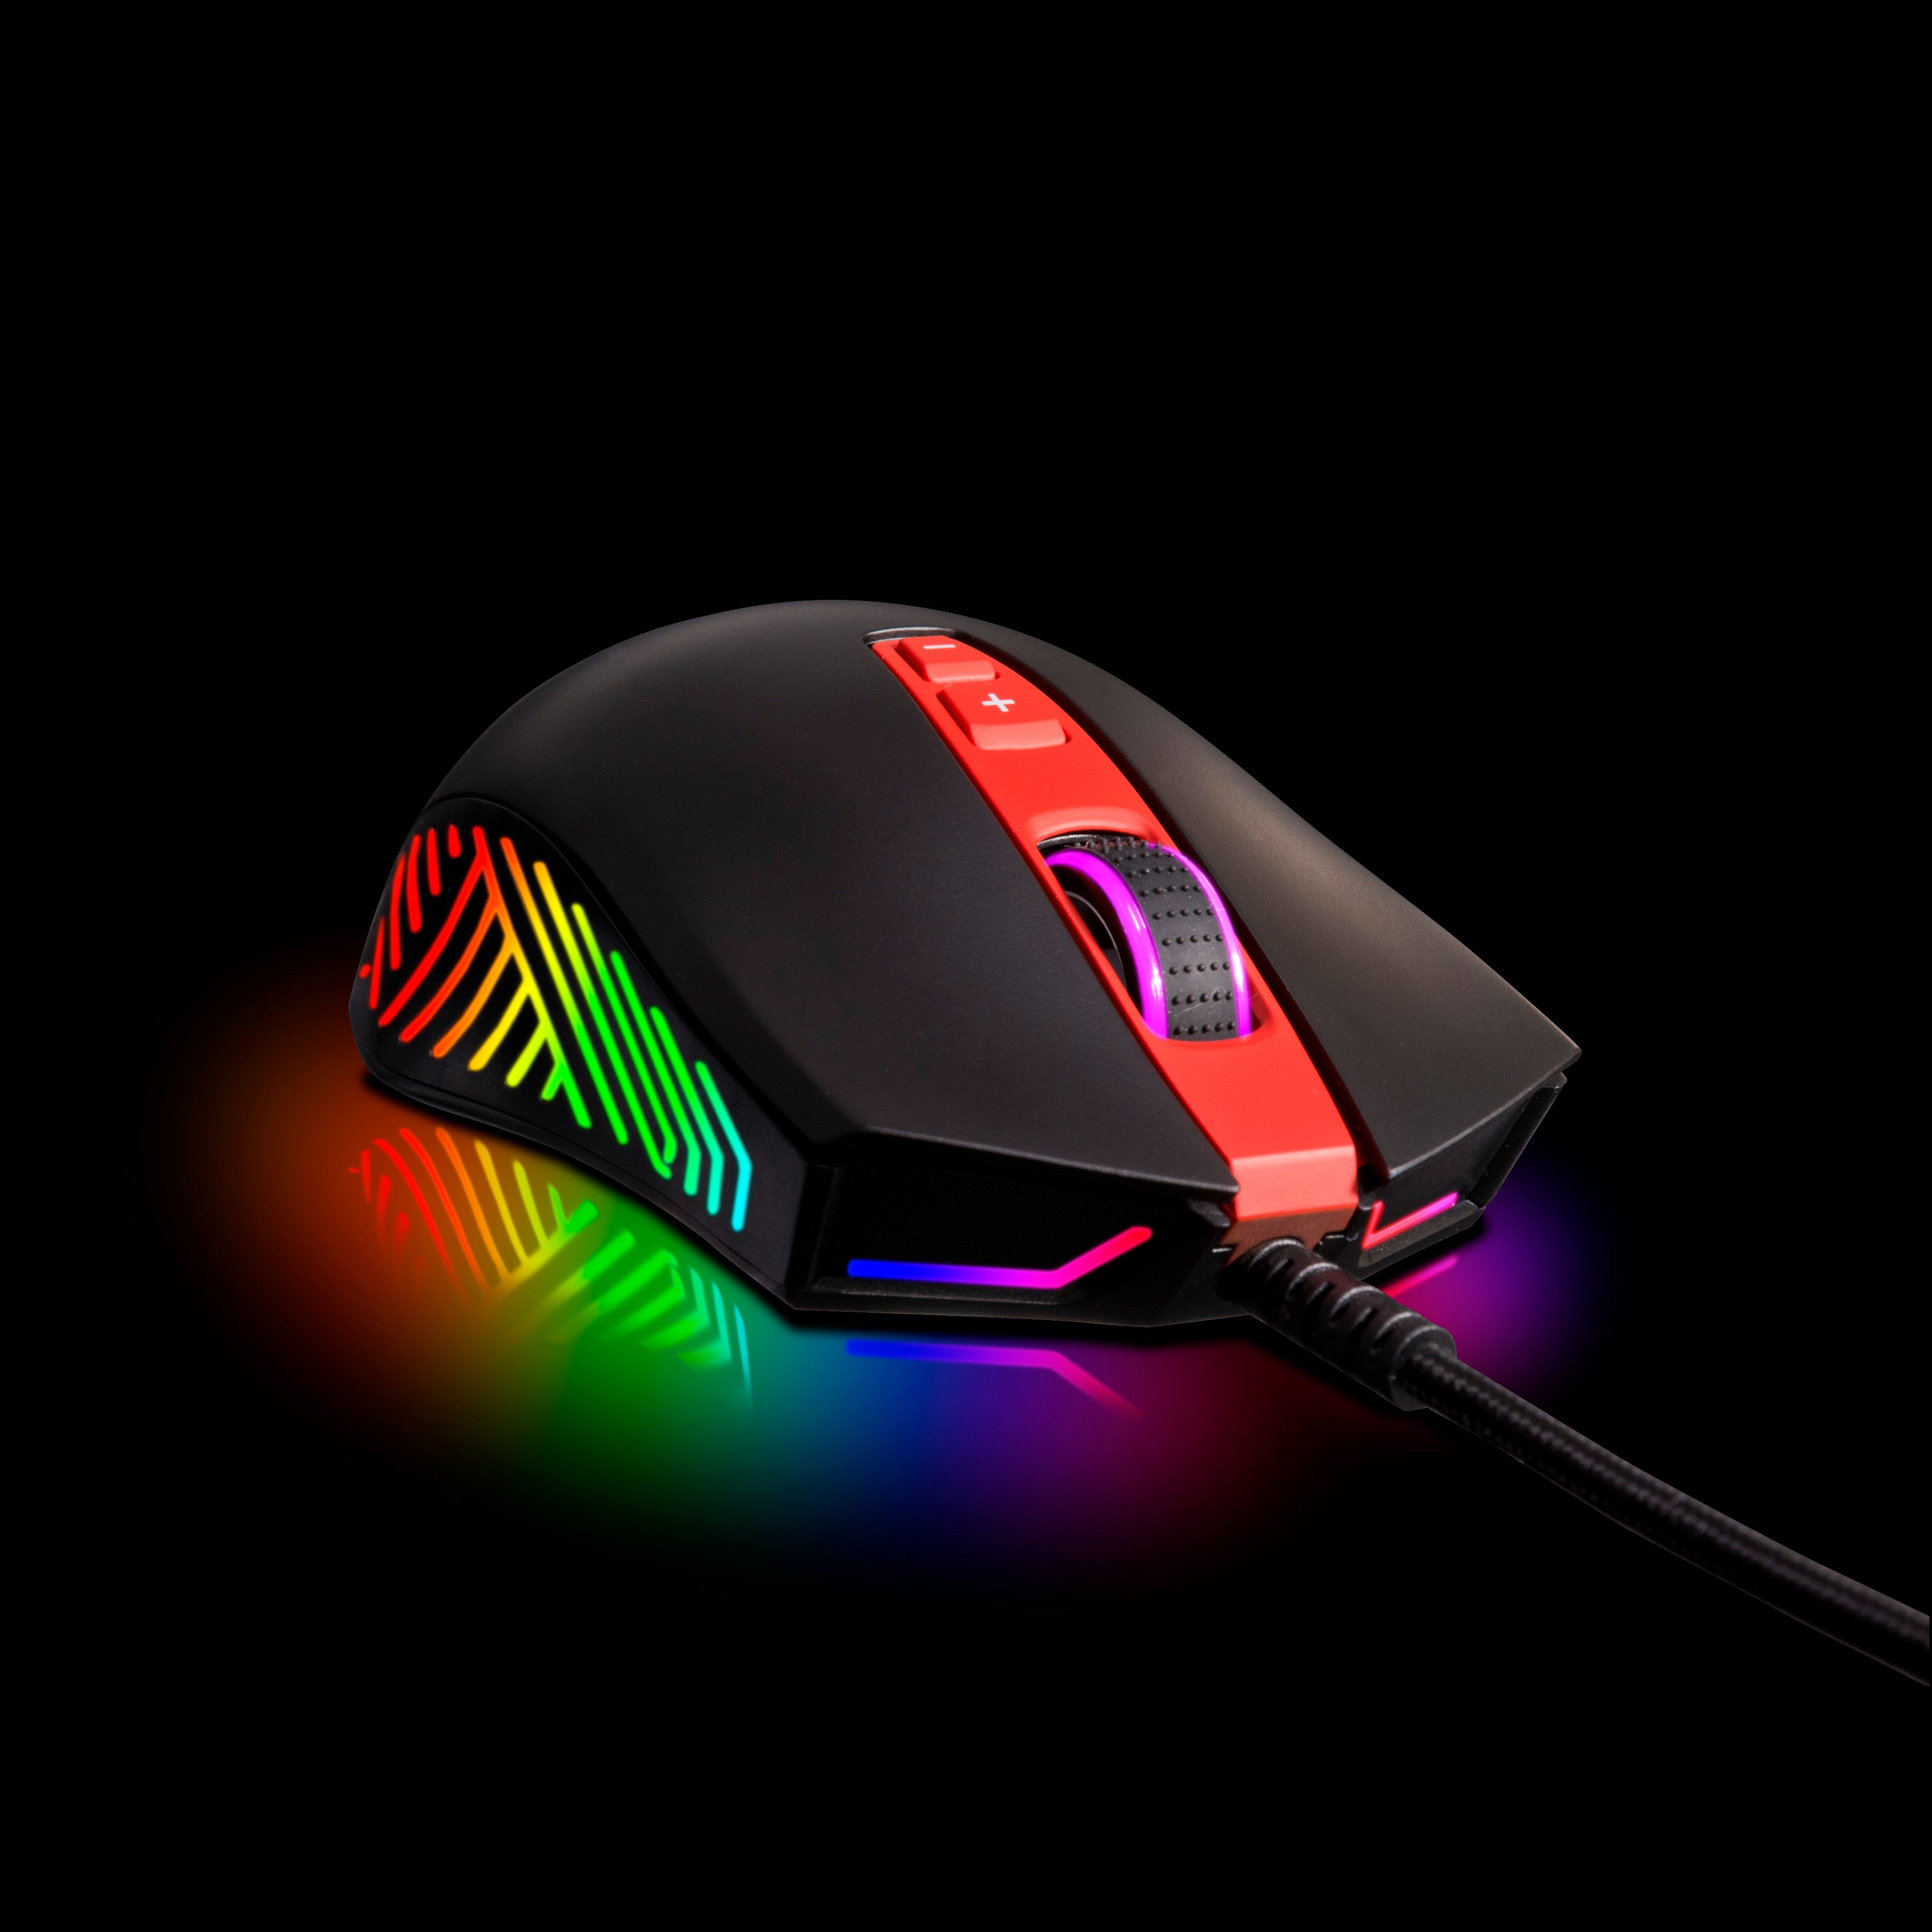 Digifast Nightfall NF15 RGB Gaming Mouse, Adjustable Weight, 60 Million Click Durability, 7 Programmable Buttons, Dynamic RGB, Customizable Color, DPI